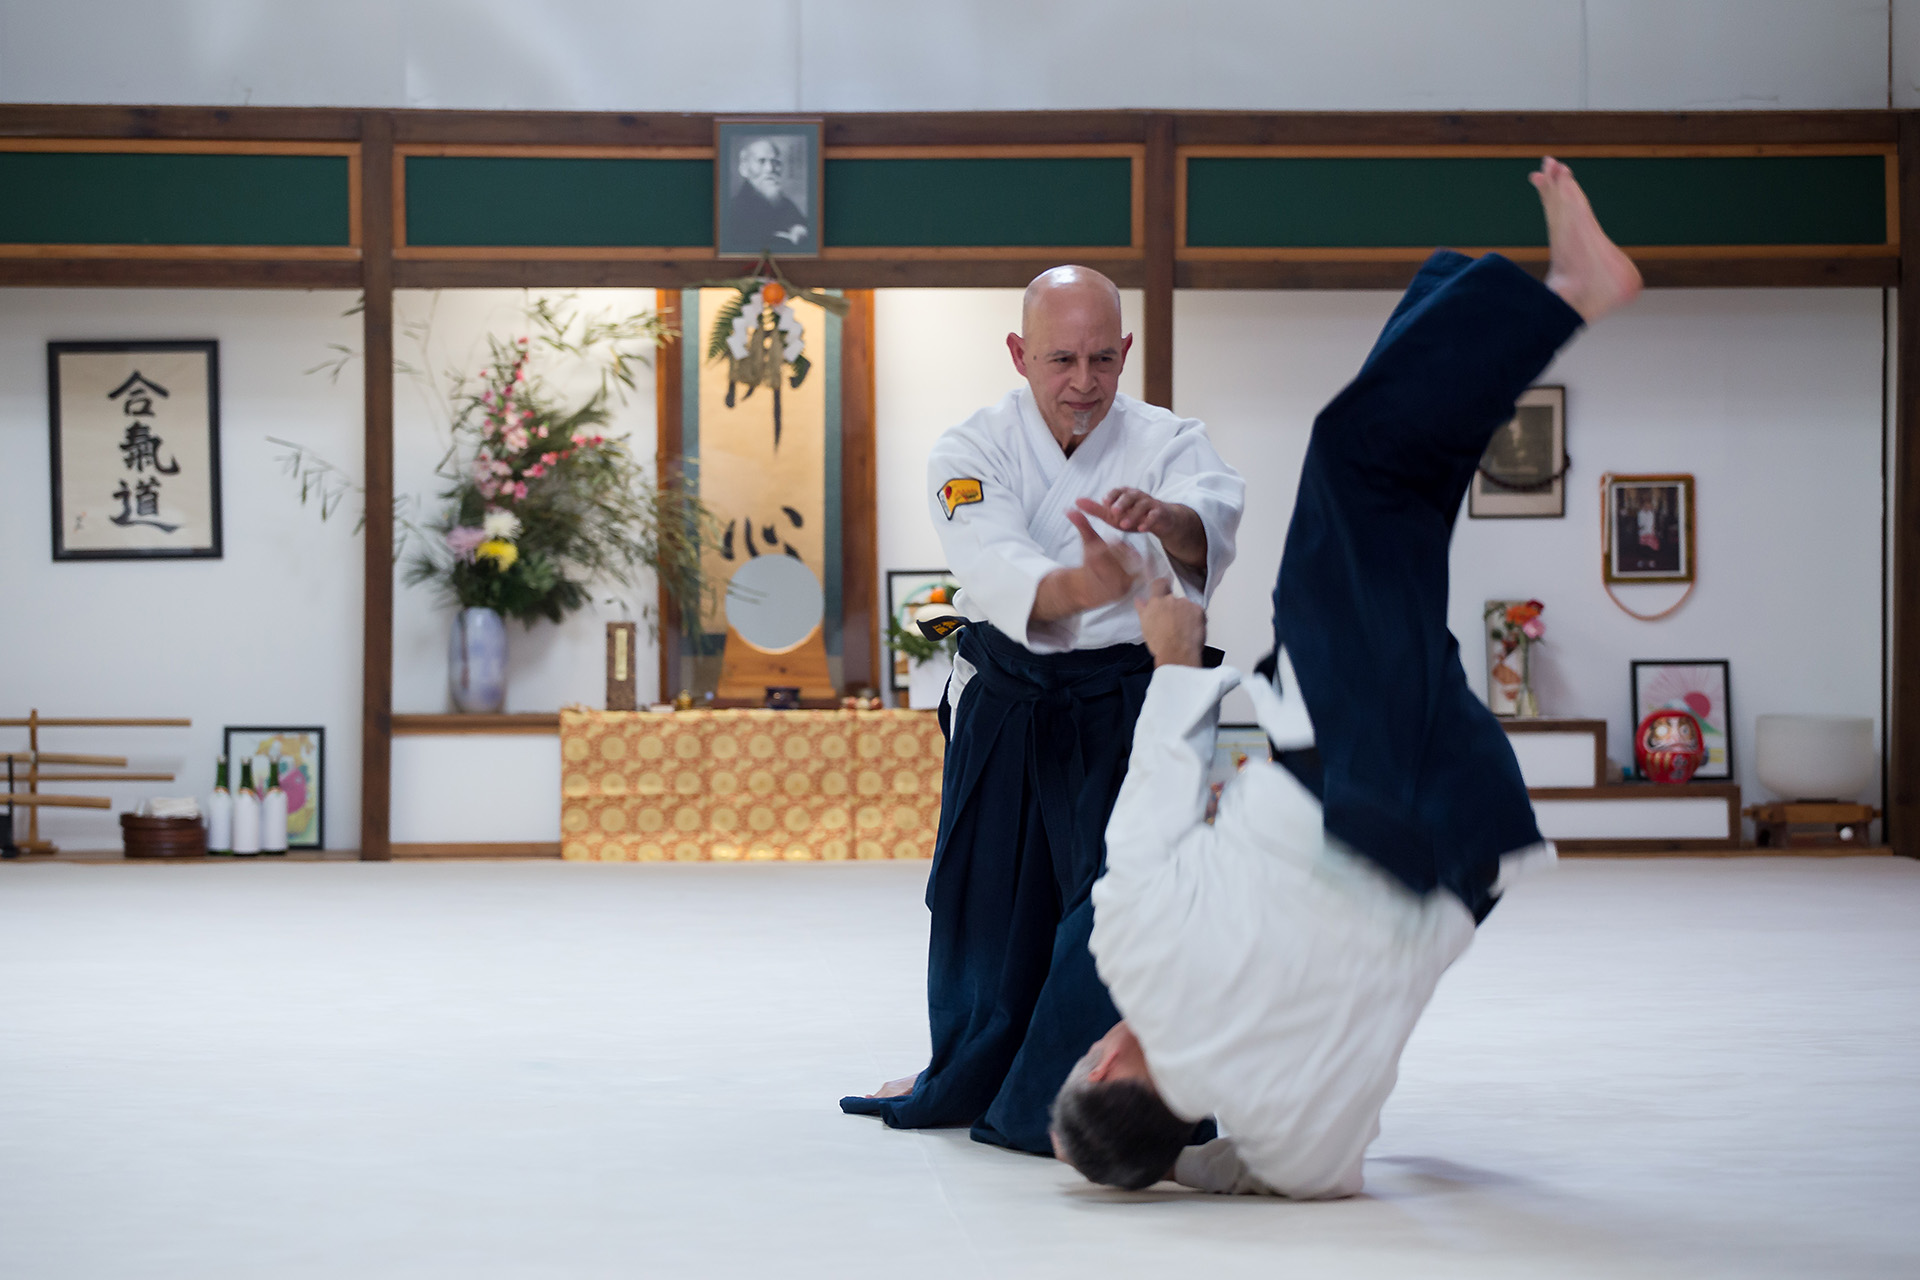 aikido is pic 3